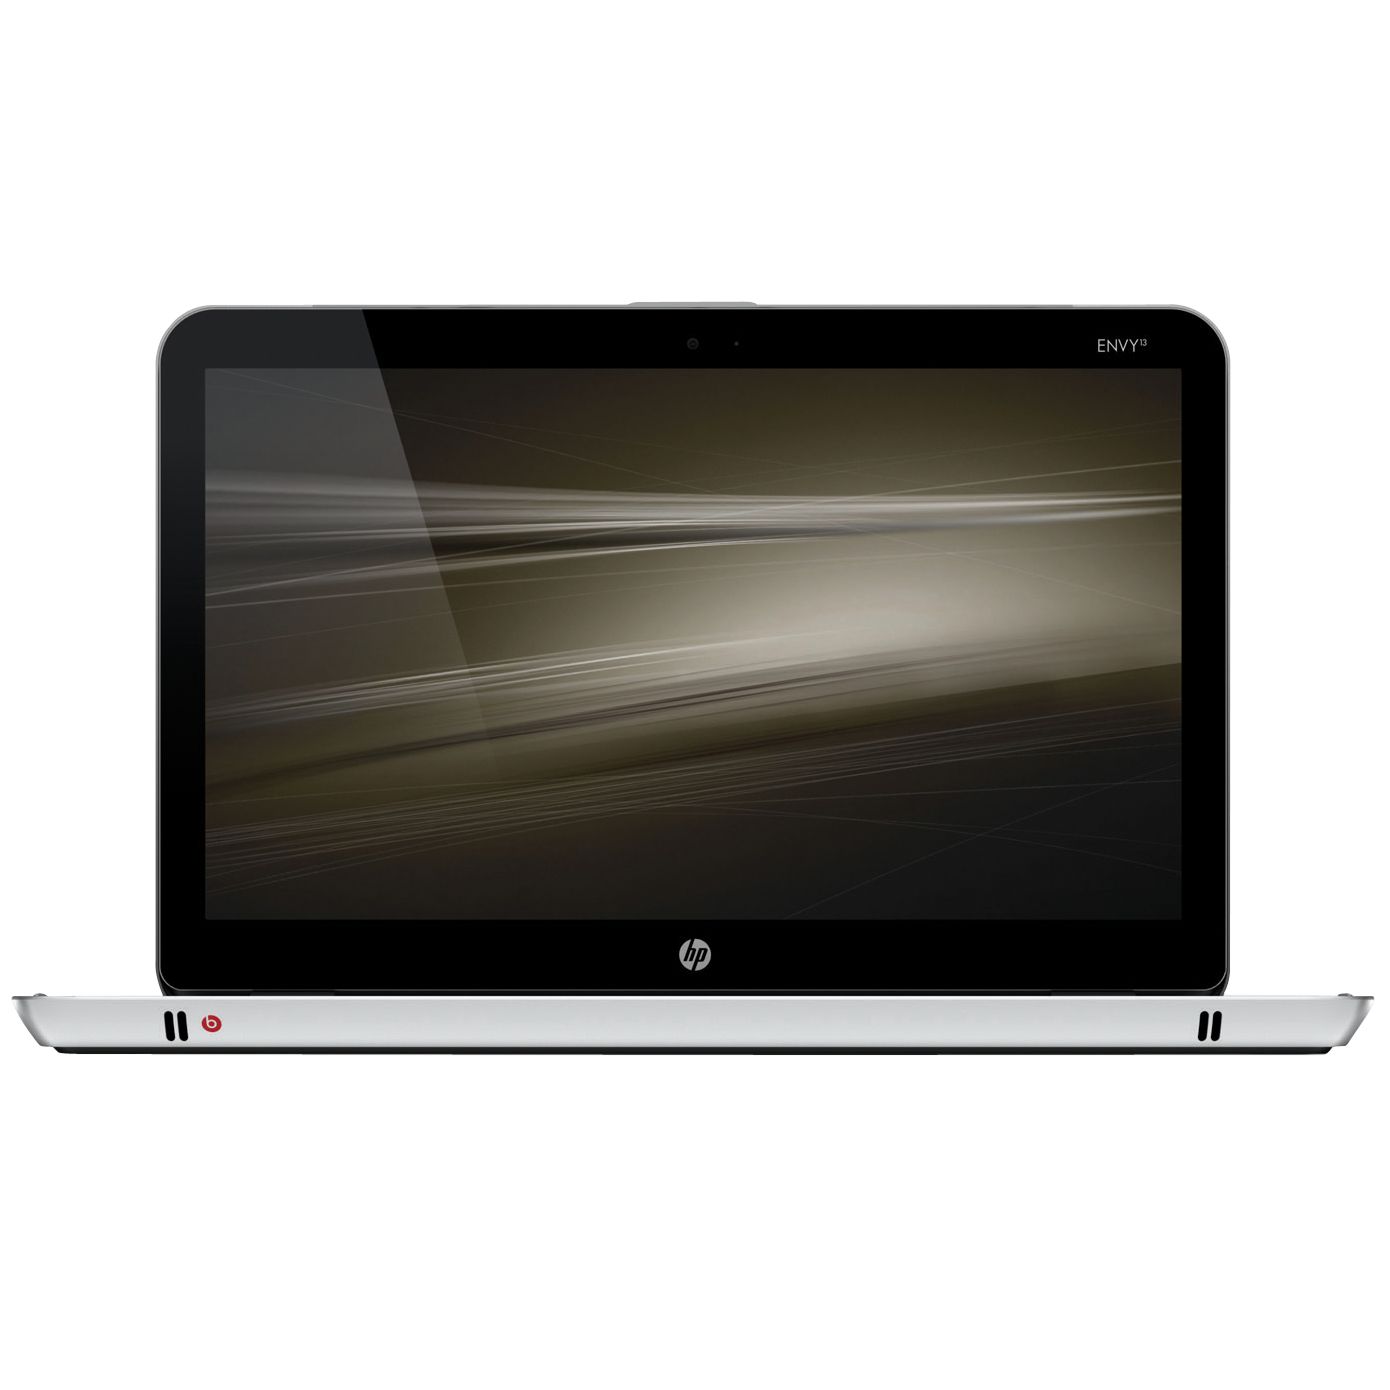 HP Envy 13-1050EA Laptop, Intel Core 2 Duo, 250GB, 1.86GHz, 3GB RAM with 13.1 Inch Display at John Lewis